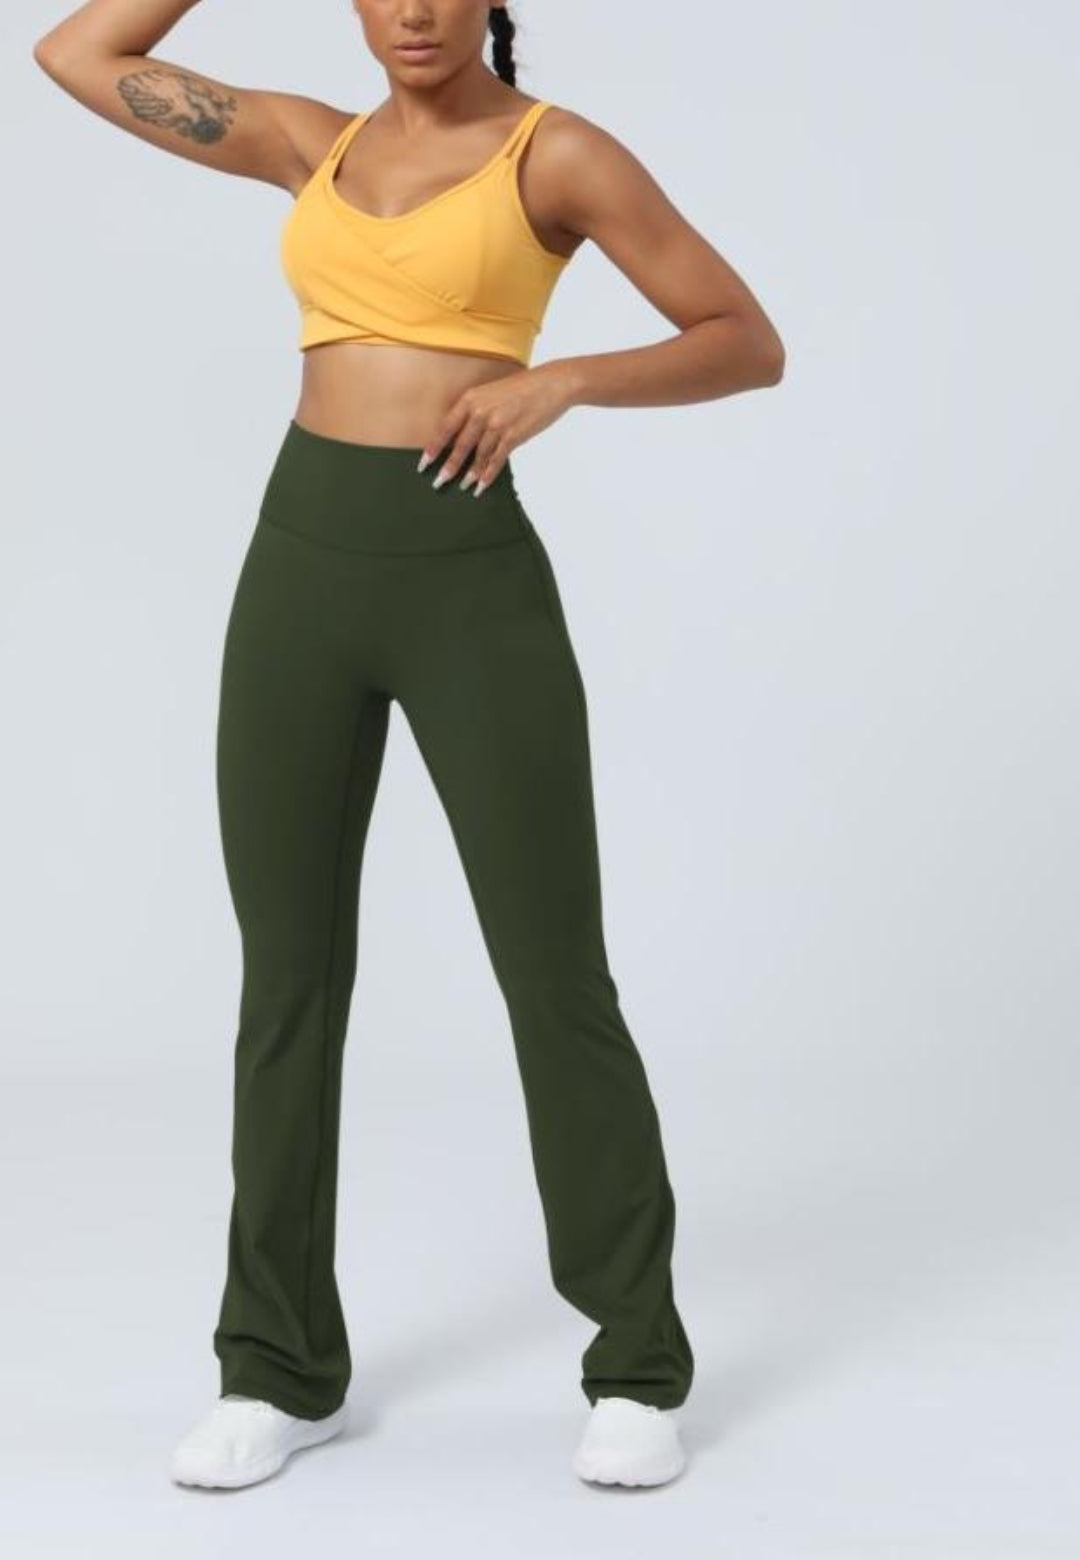 Skinny High Waisted Casual Flared Pants Fitness Sports Pants